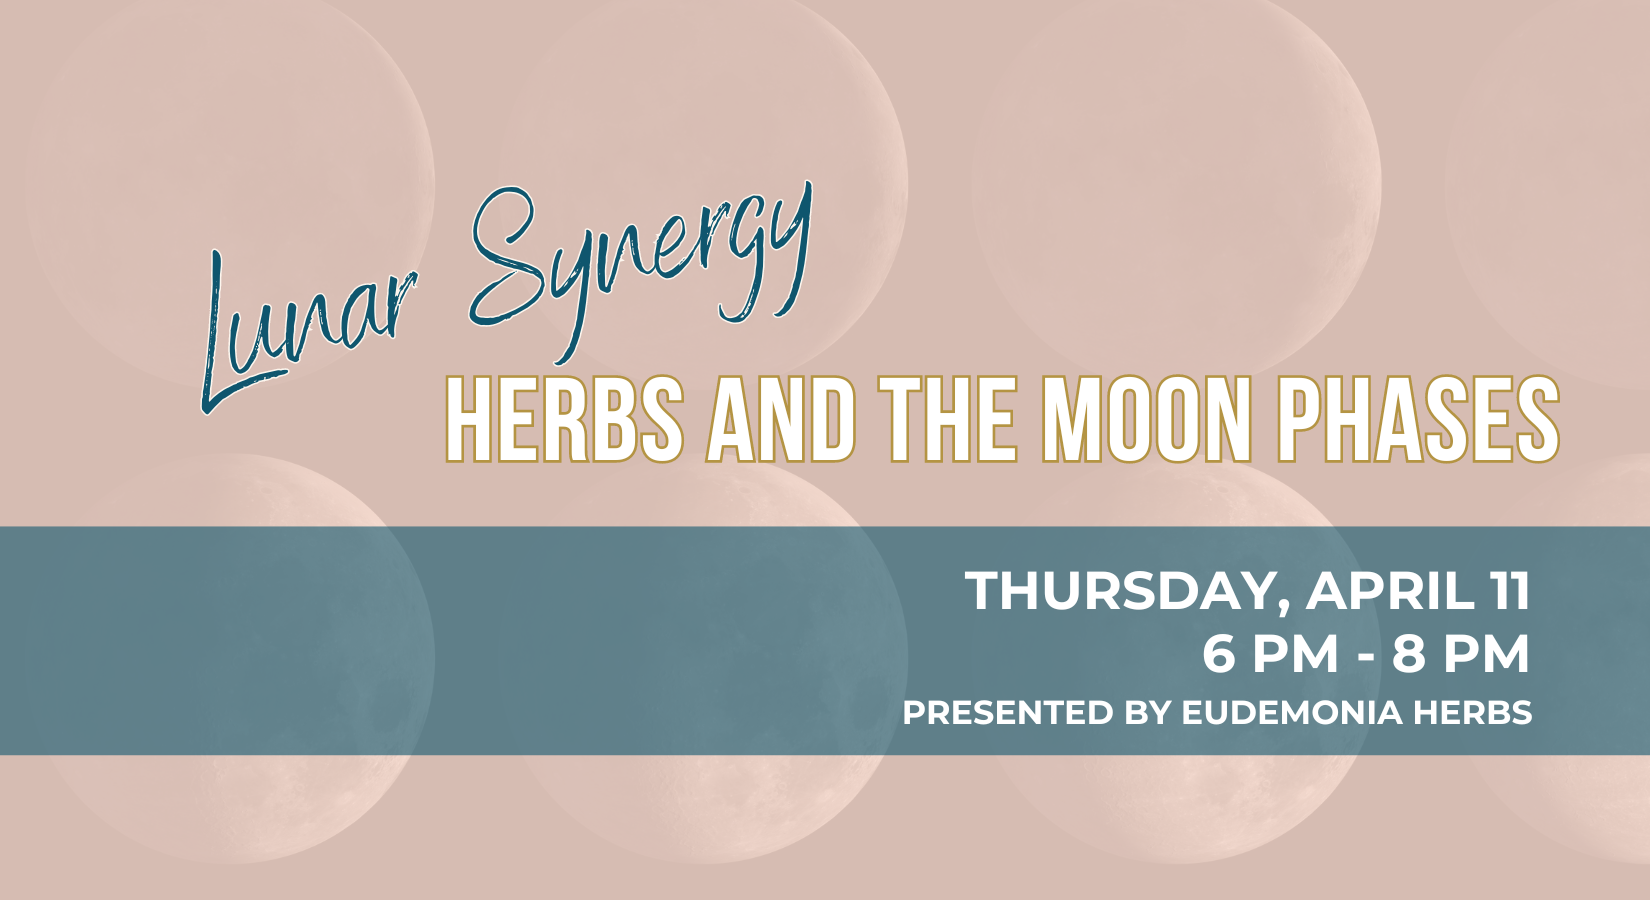 Lunar Synergy - Herbs and the Moon Phases